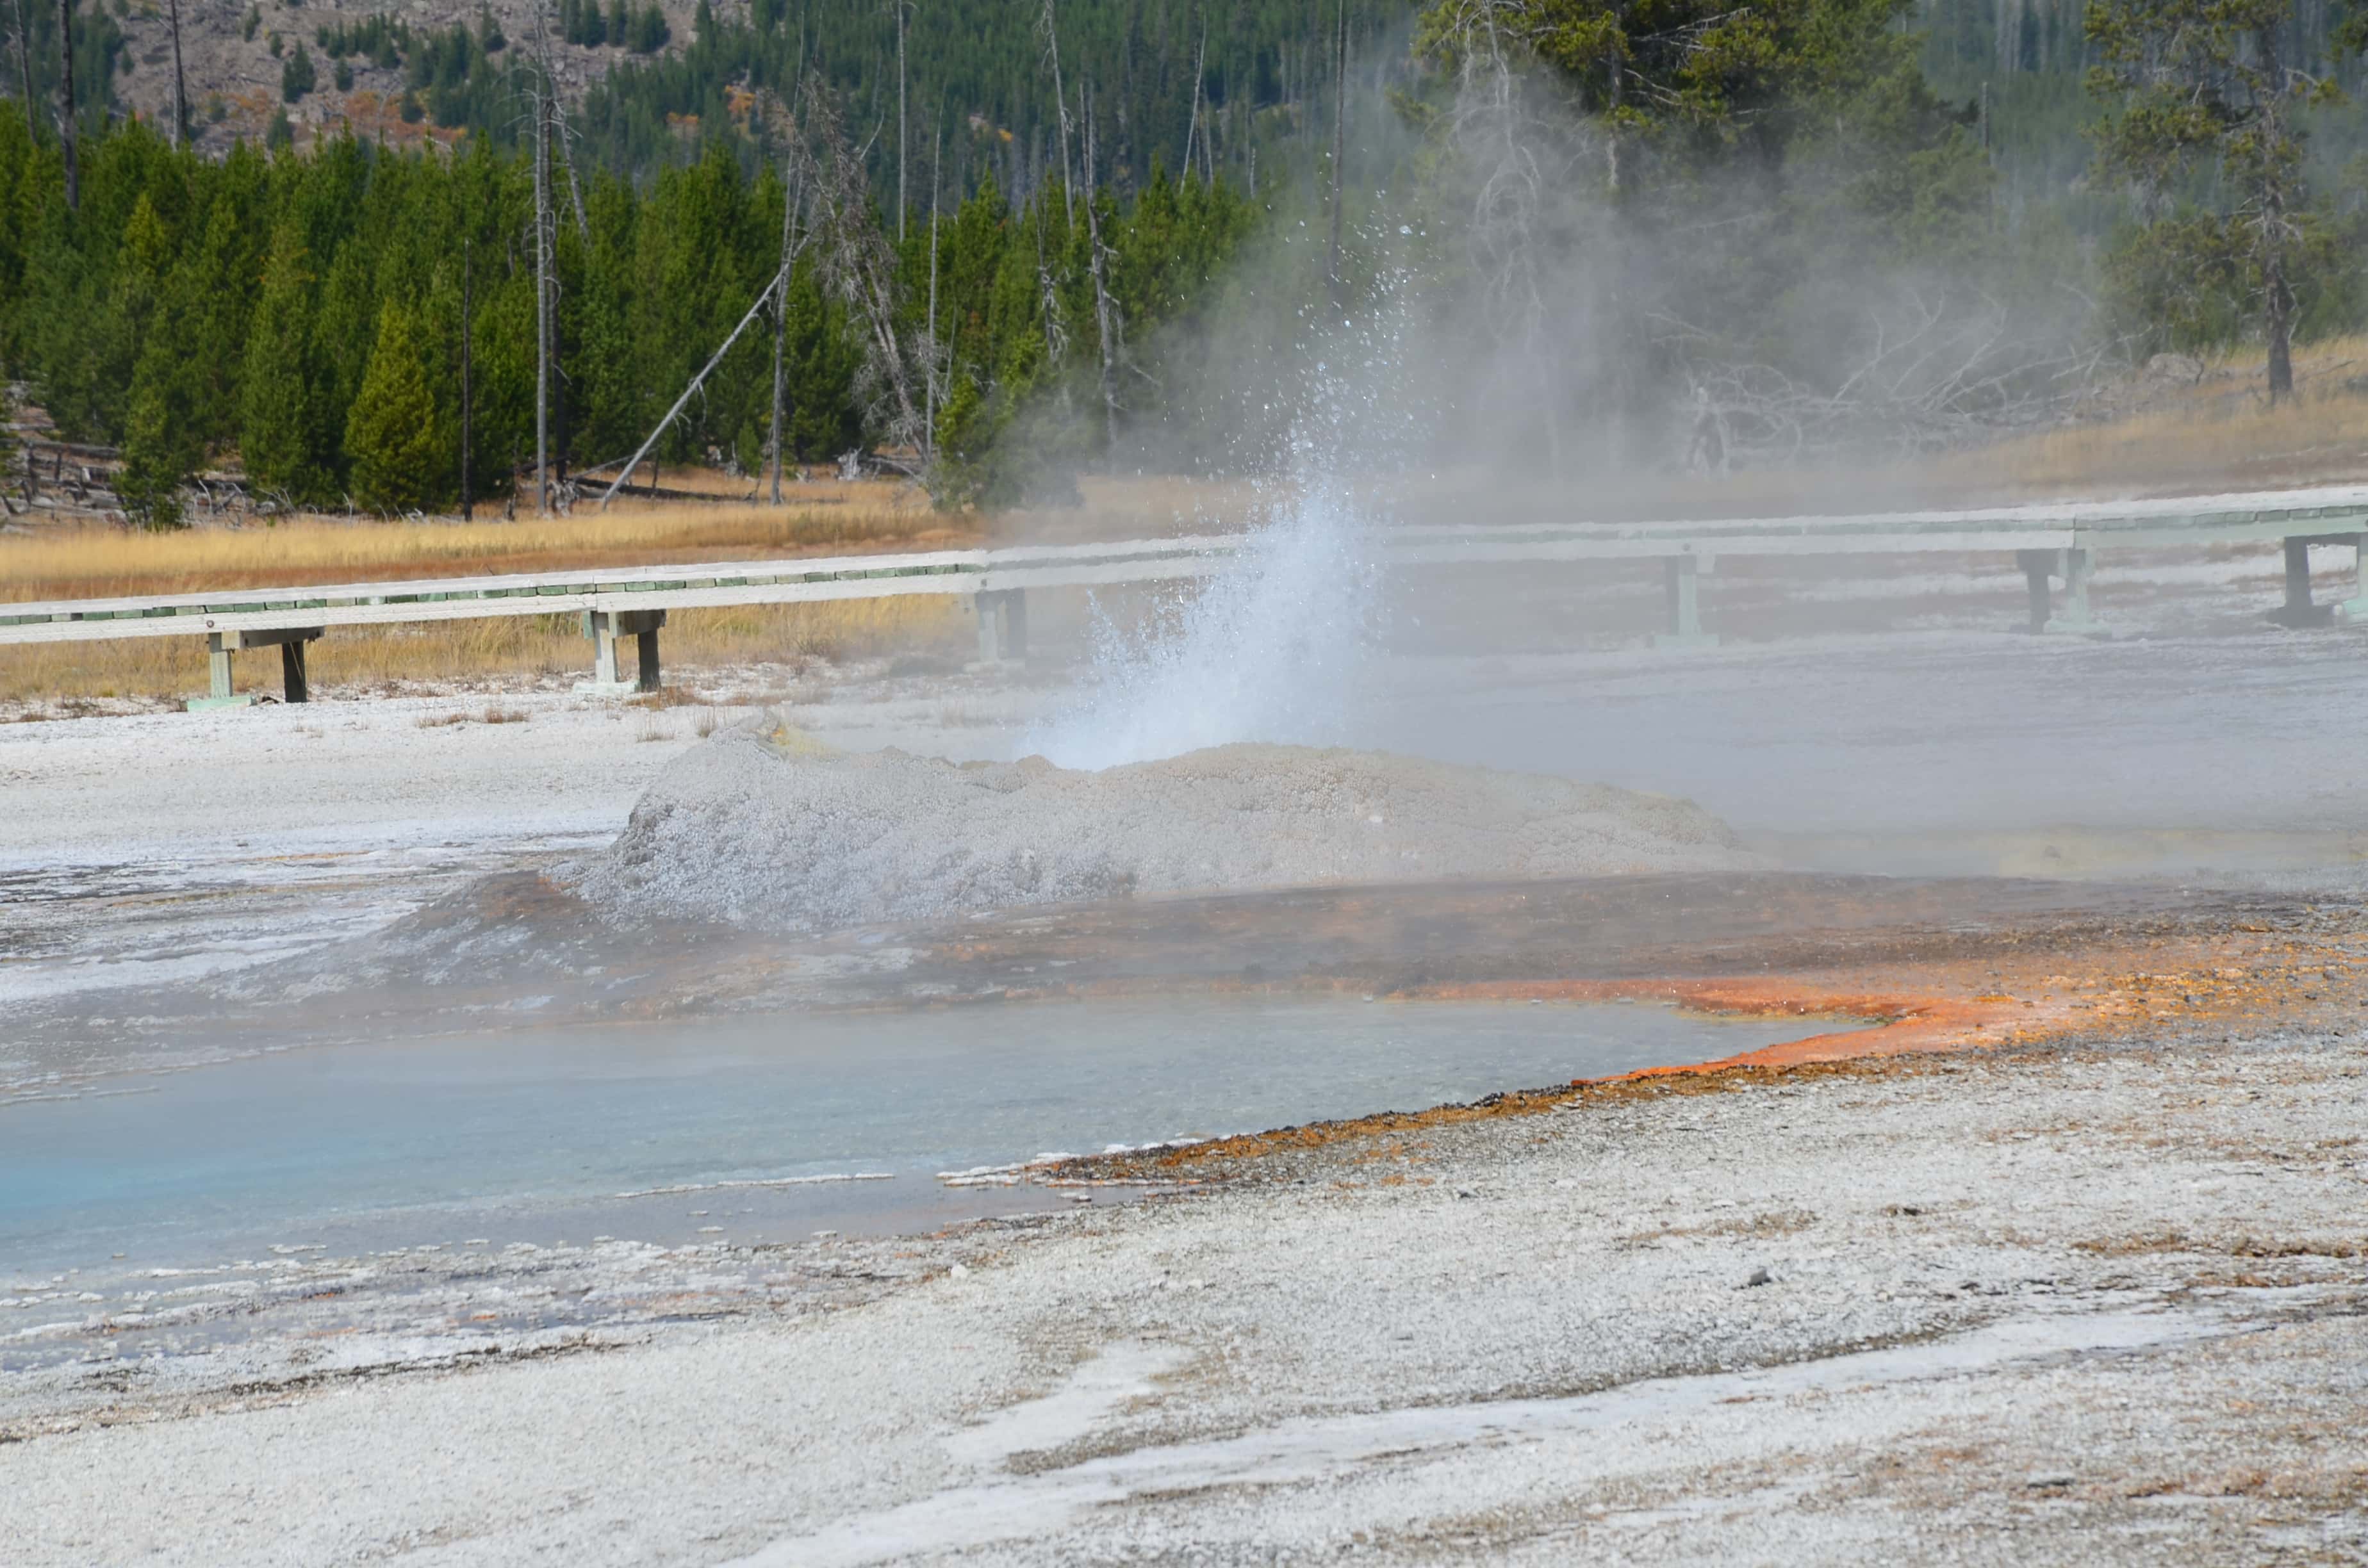 Comet Geyser at the Upper Geyser Basin in Yellowstone National Park, Wyoming